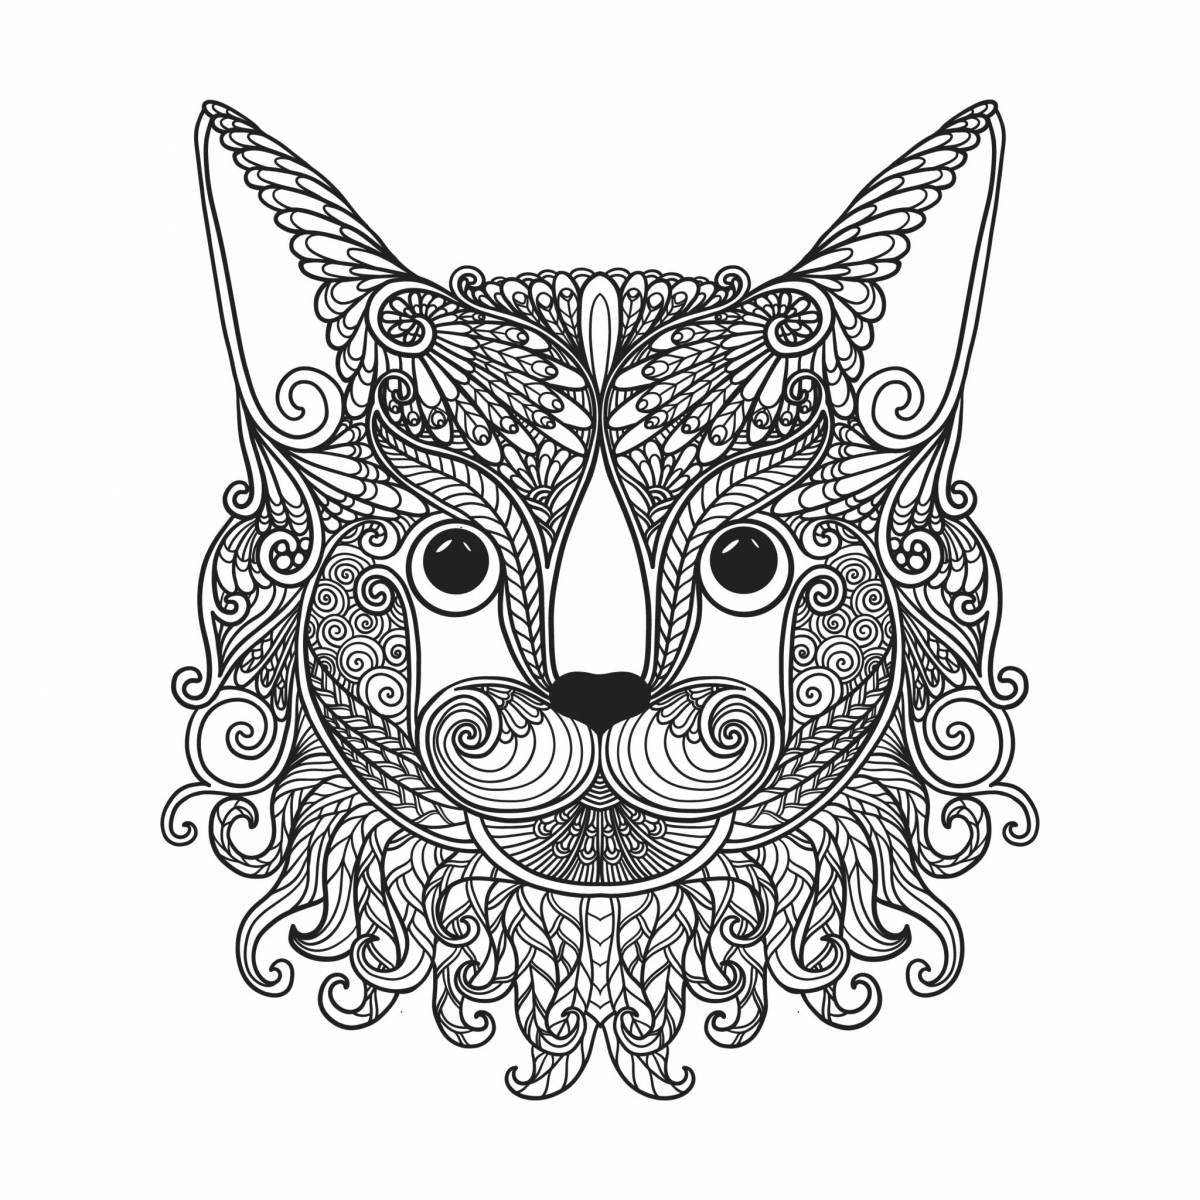 Long cat coloring page